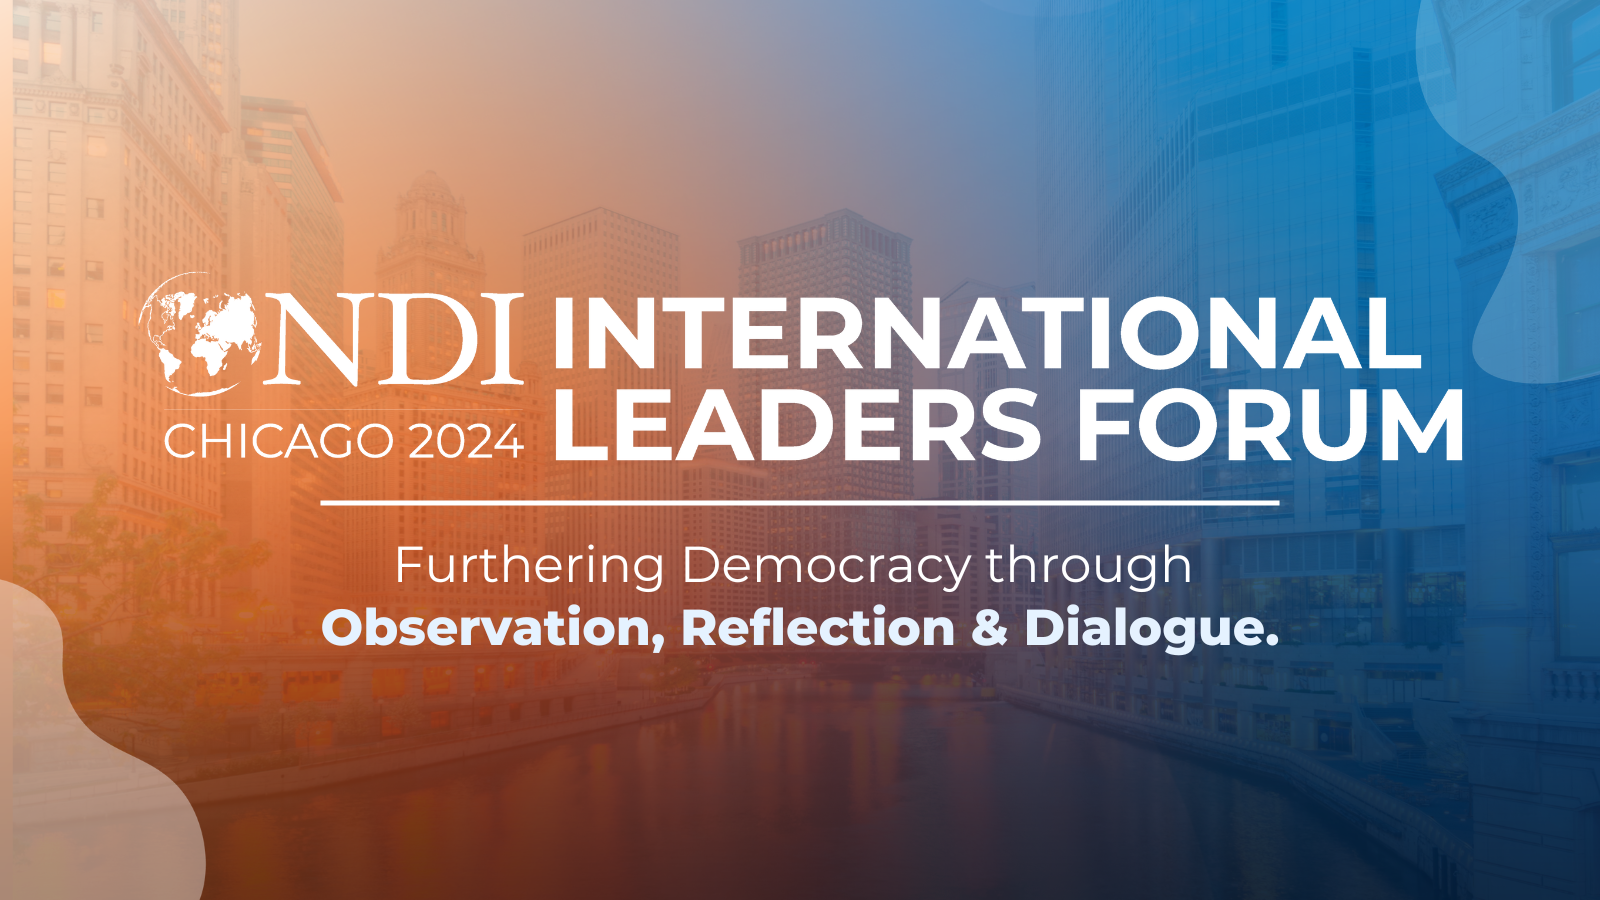 Global Democracy Leaders Gather at ILF2024